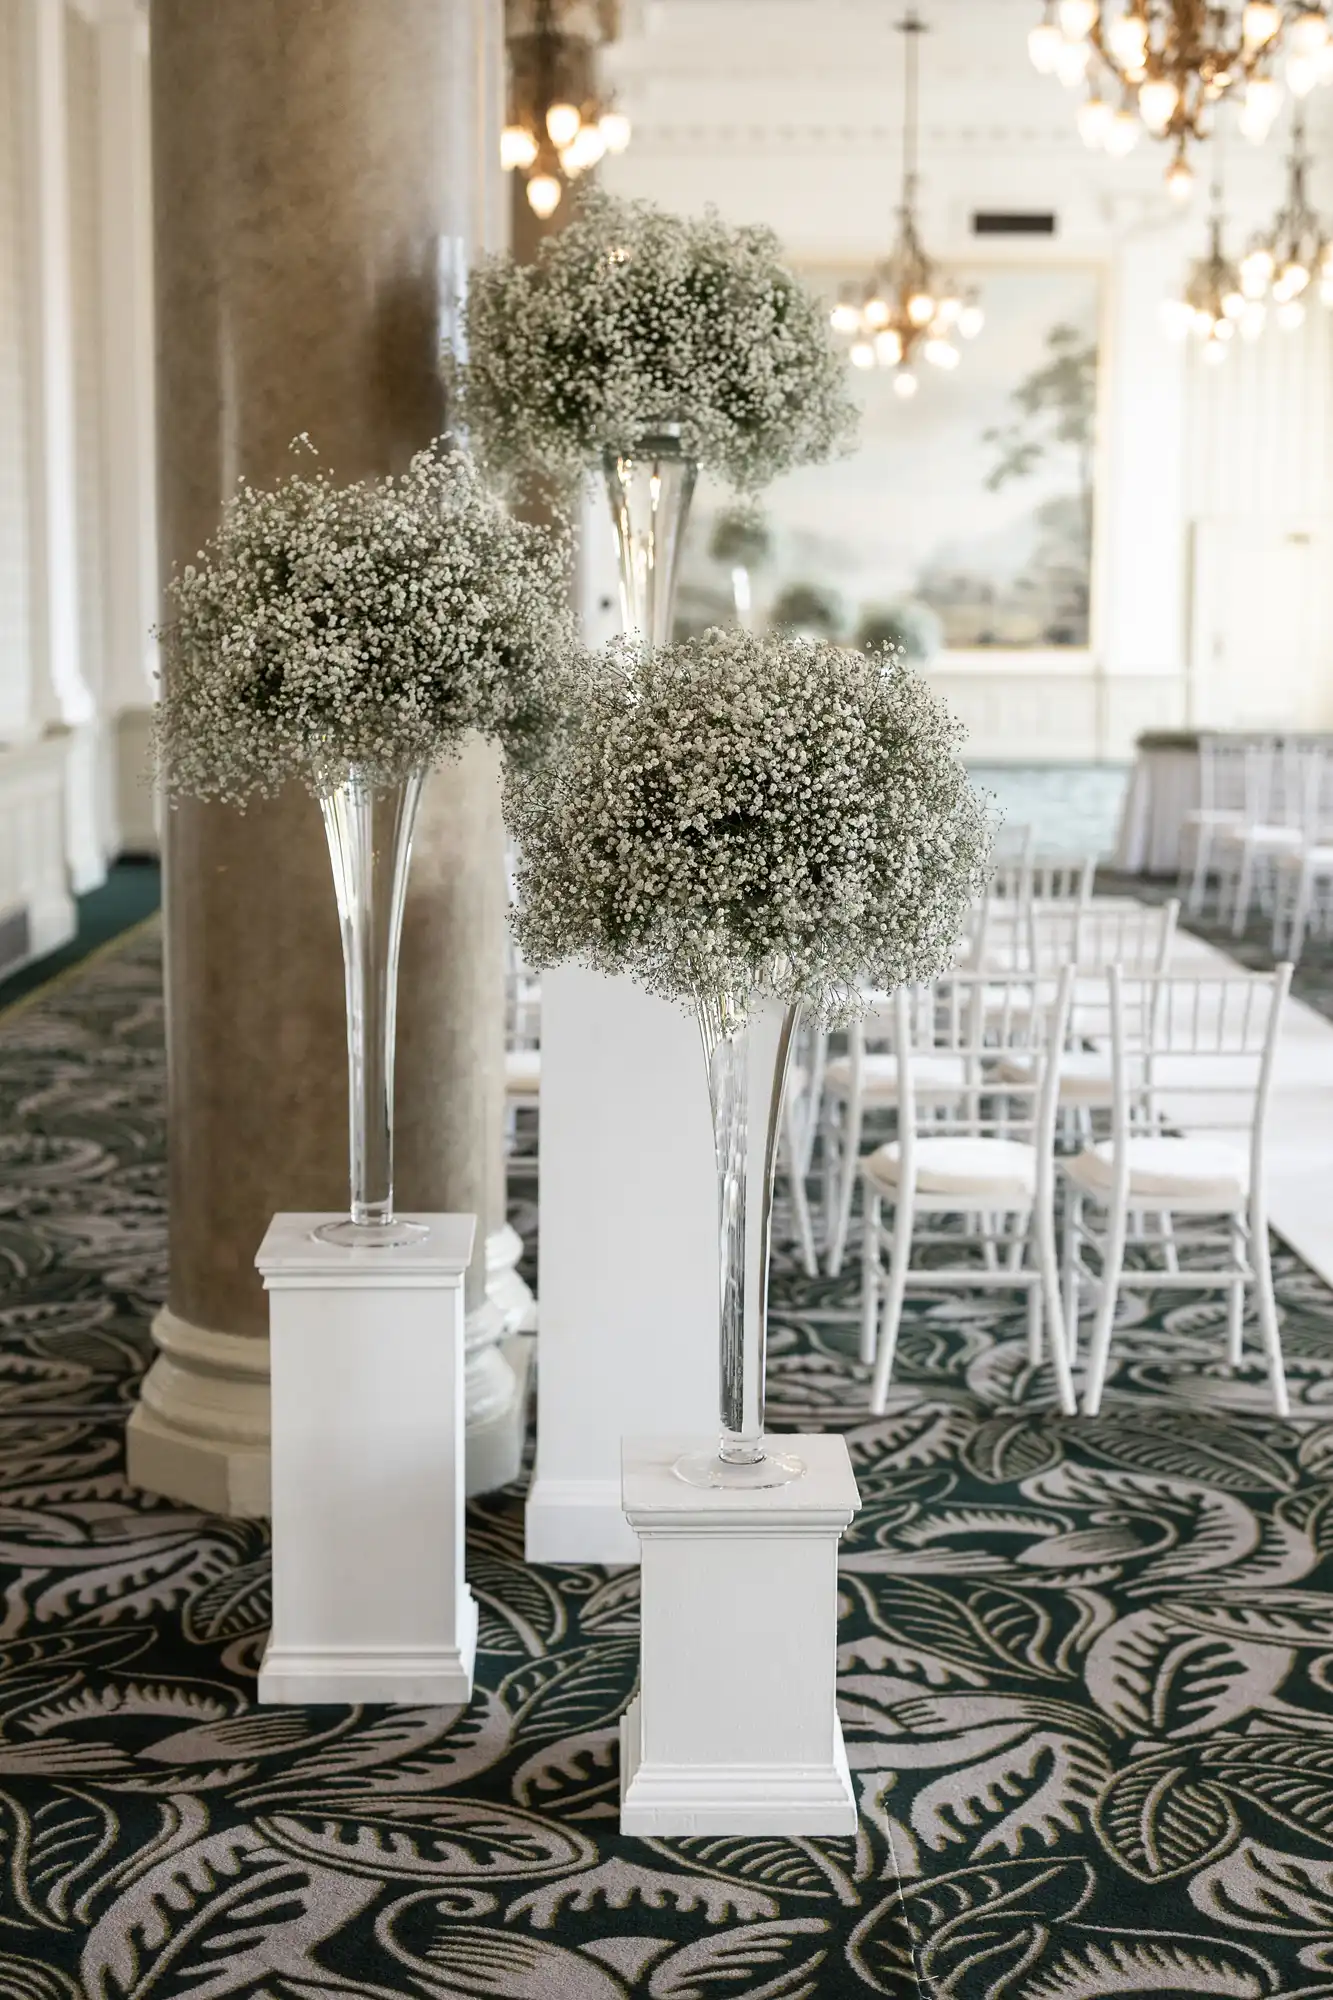 Three tall floral arrangements on white pedestals in an elegant room with ornate chandeliers and patterned carpet.